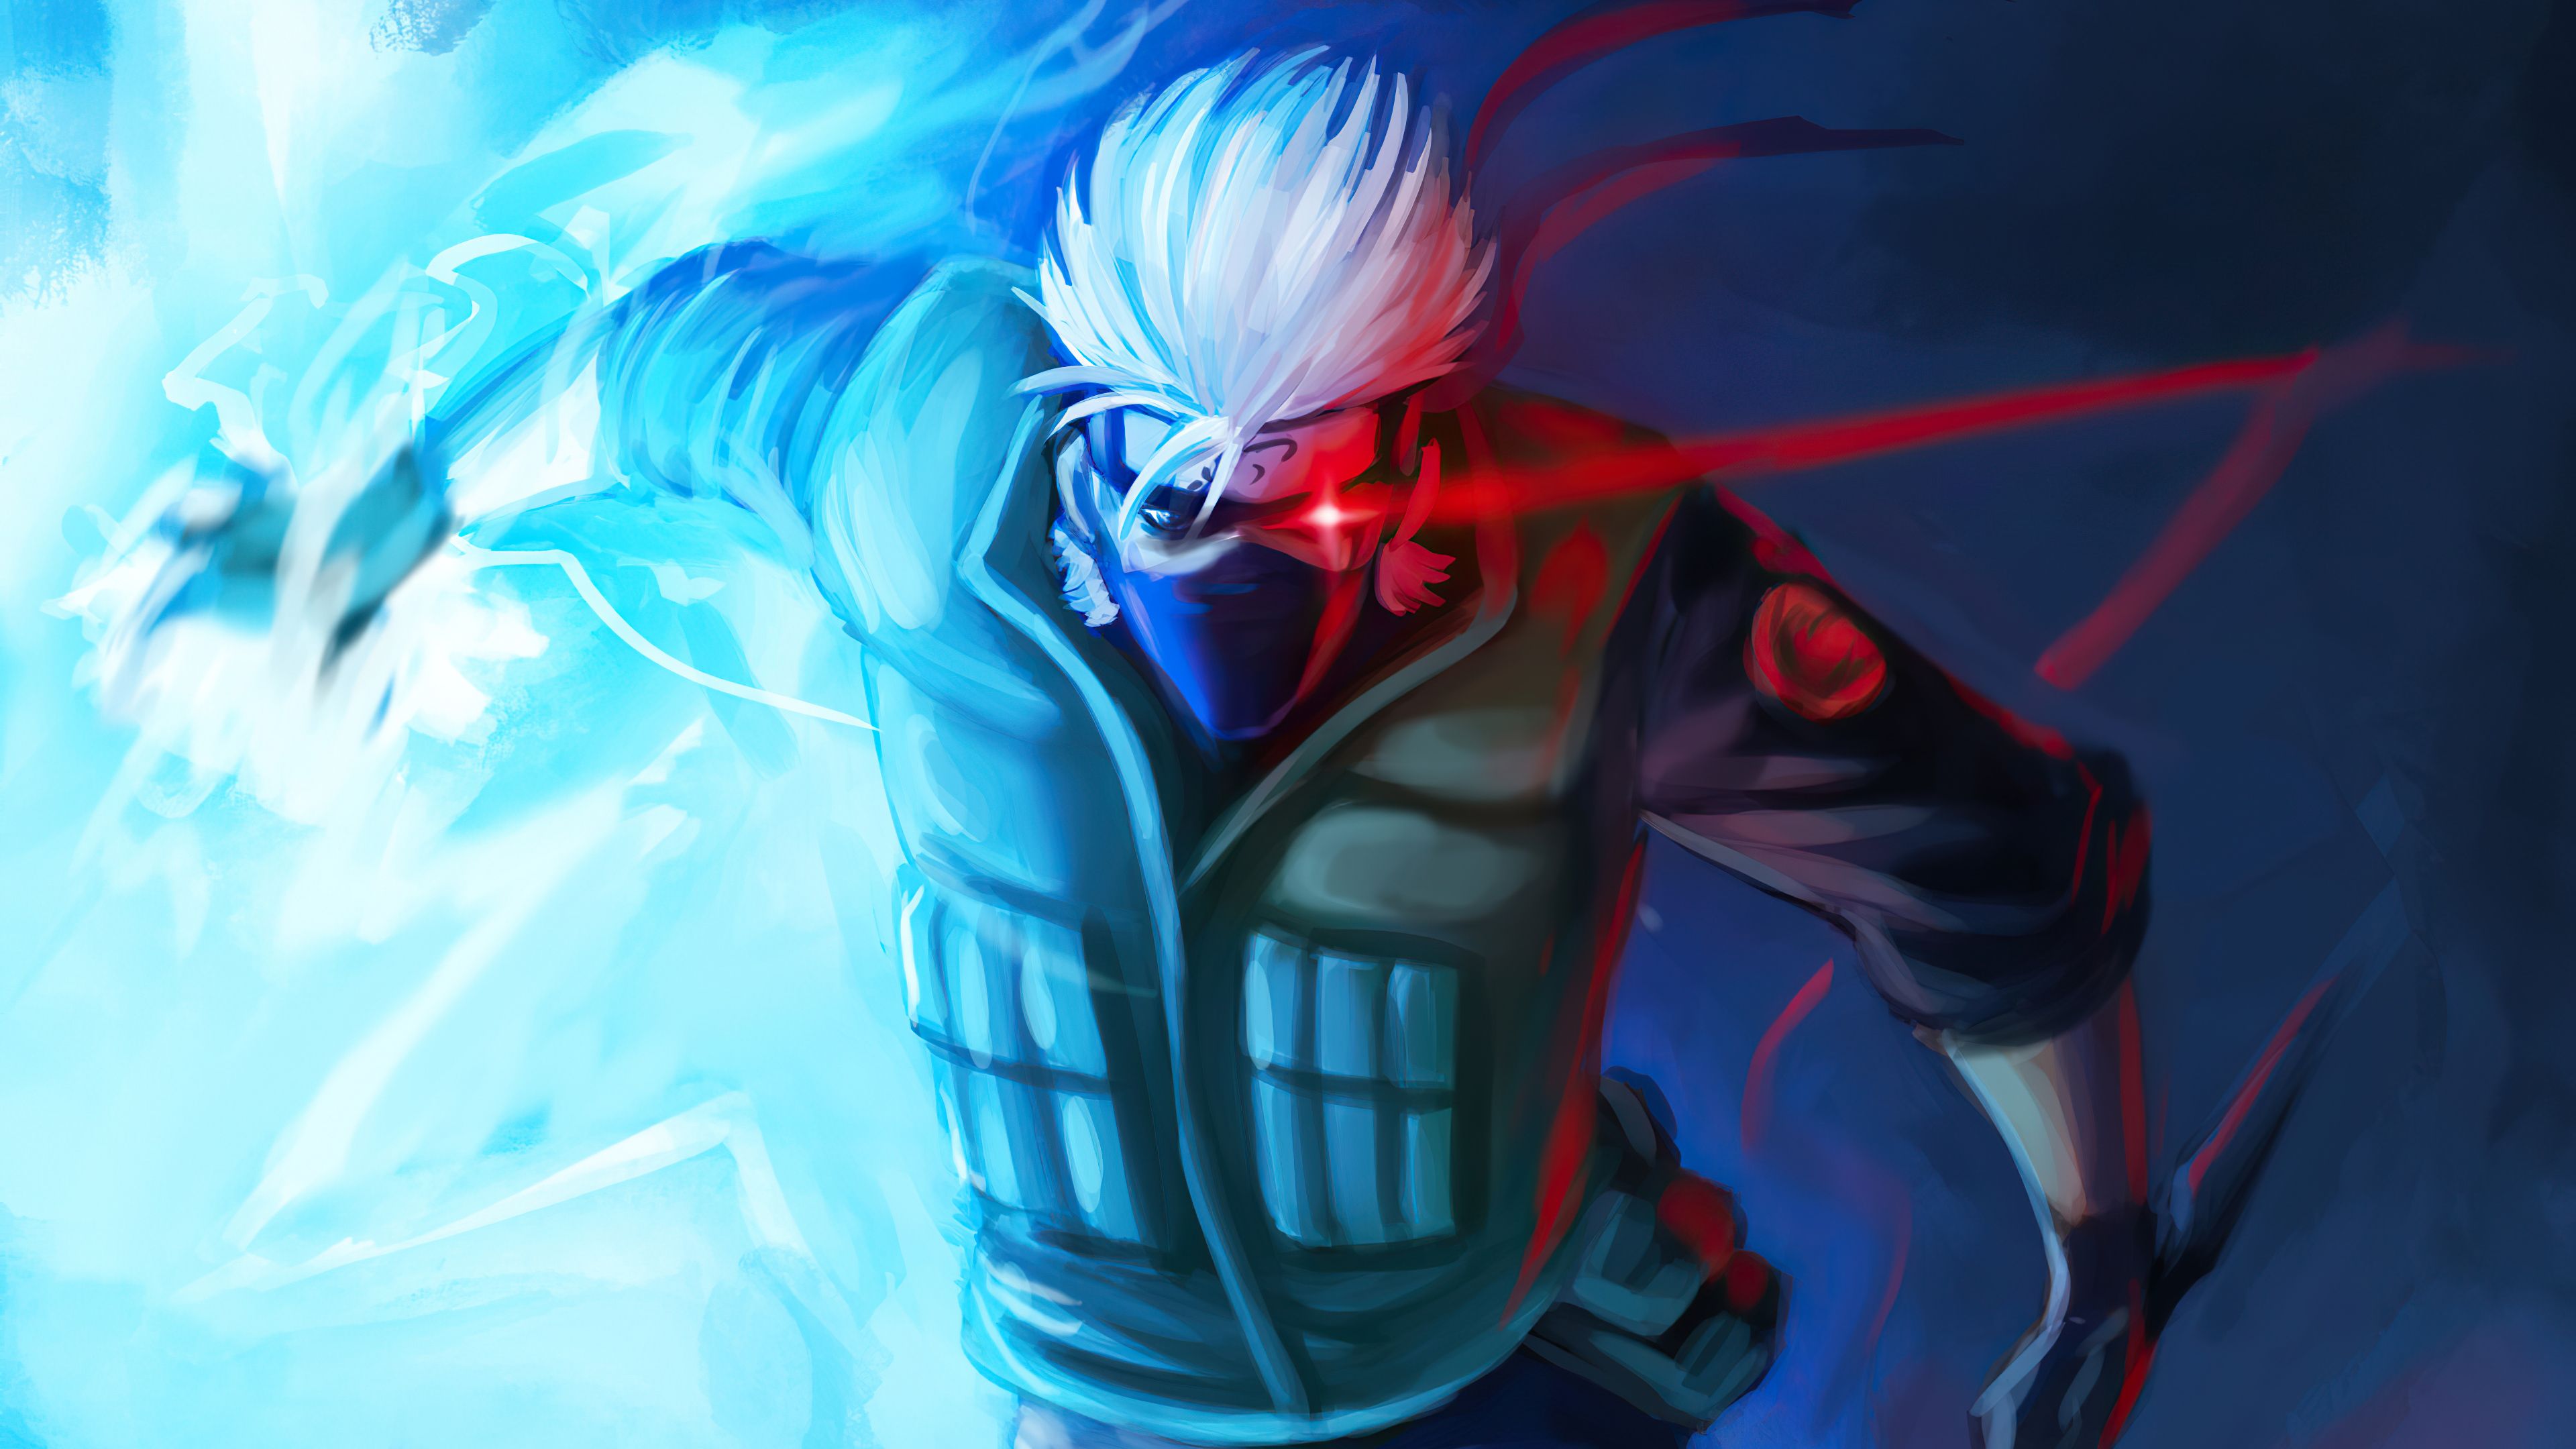 Kakashi 4k Apple iPhone, iPod Touch, Galaxy Ace HD 4k Wallpaper, Image, Background, Photo and Picture